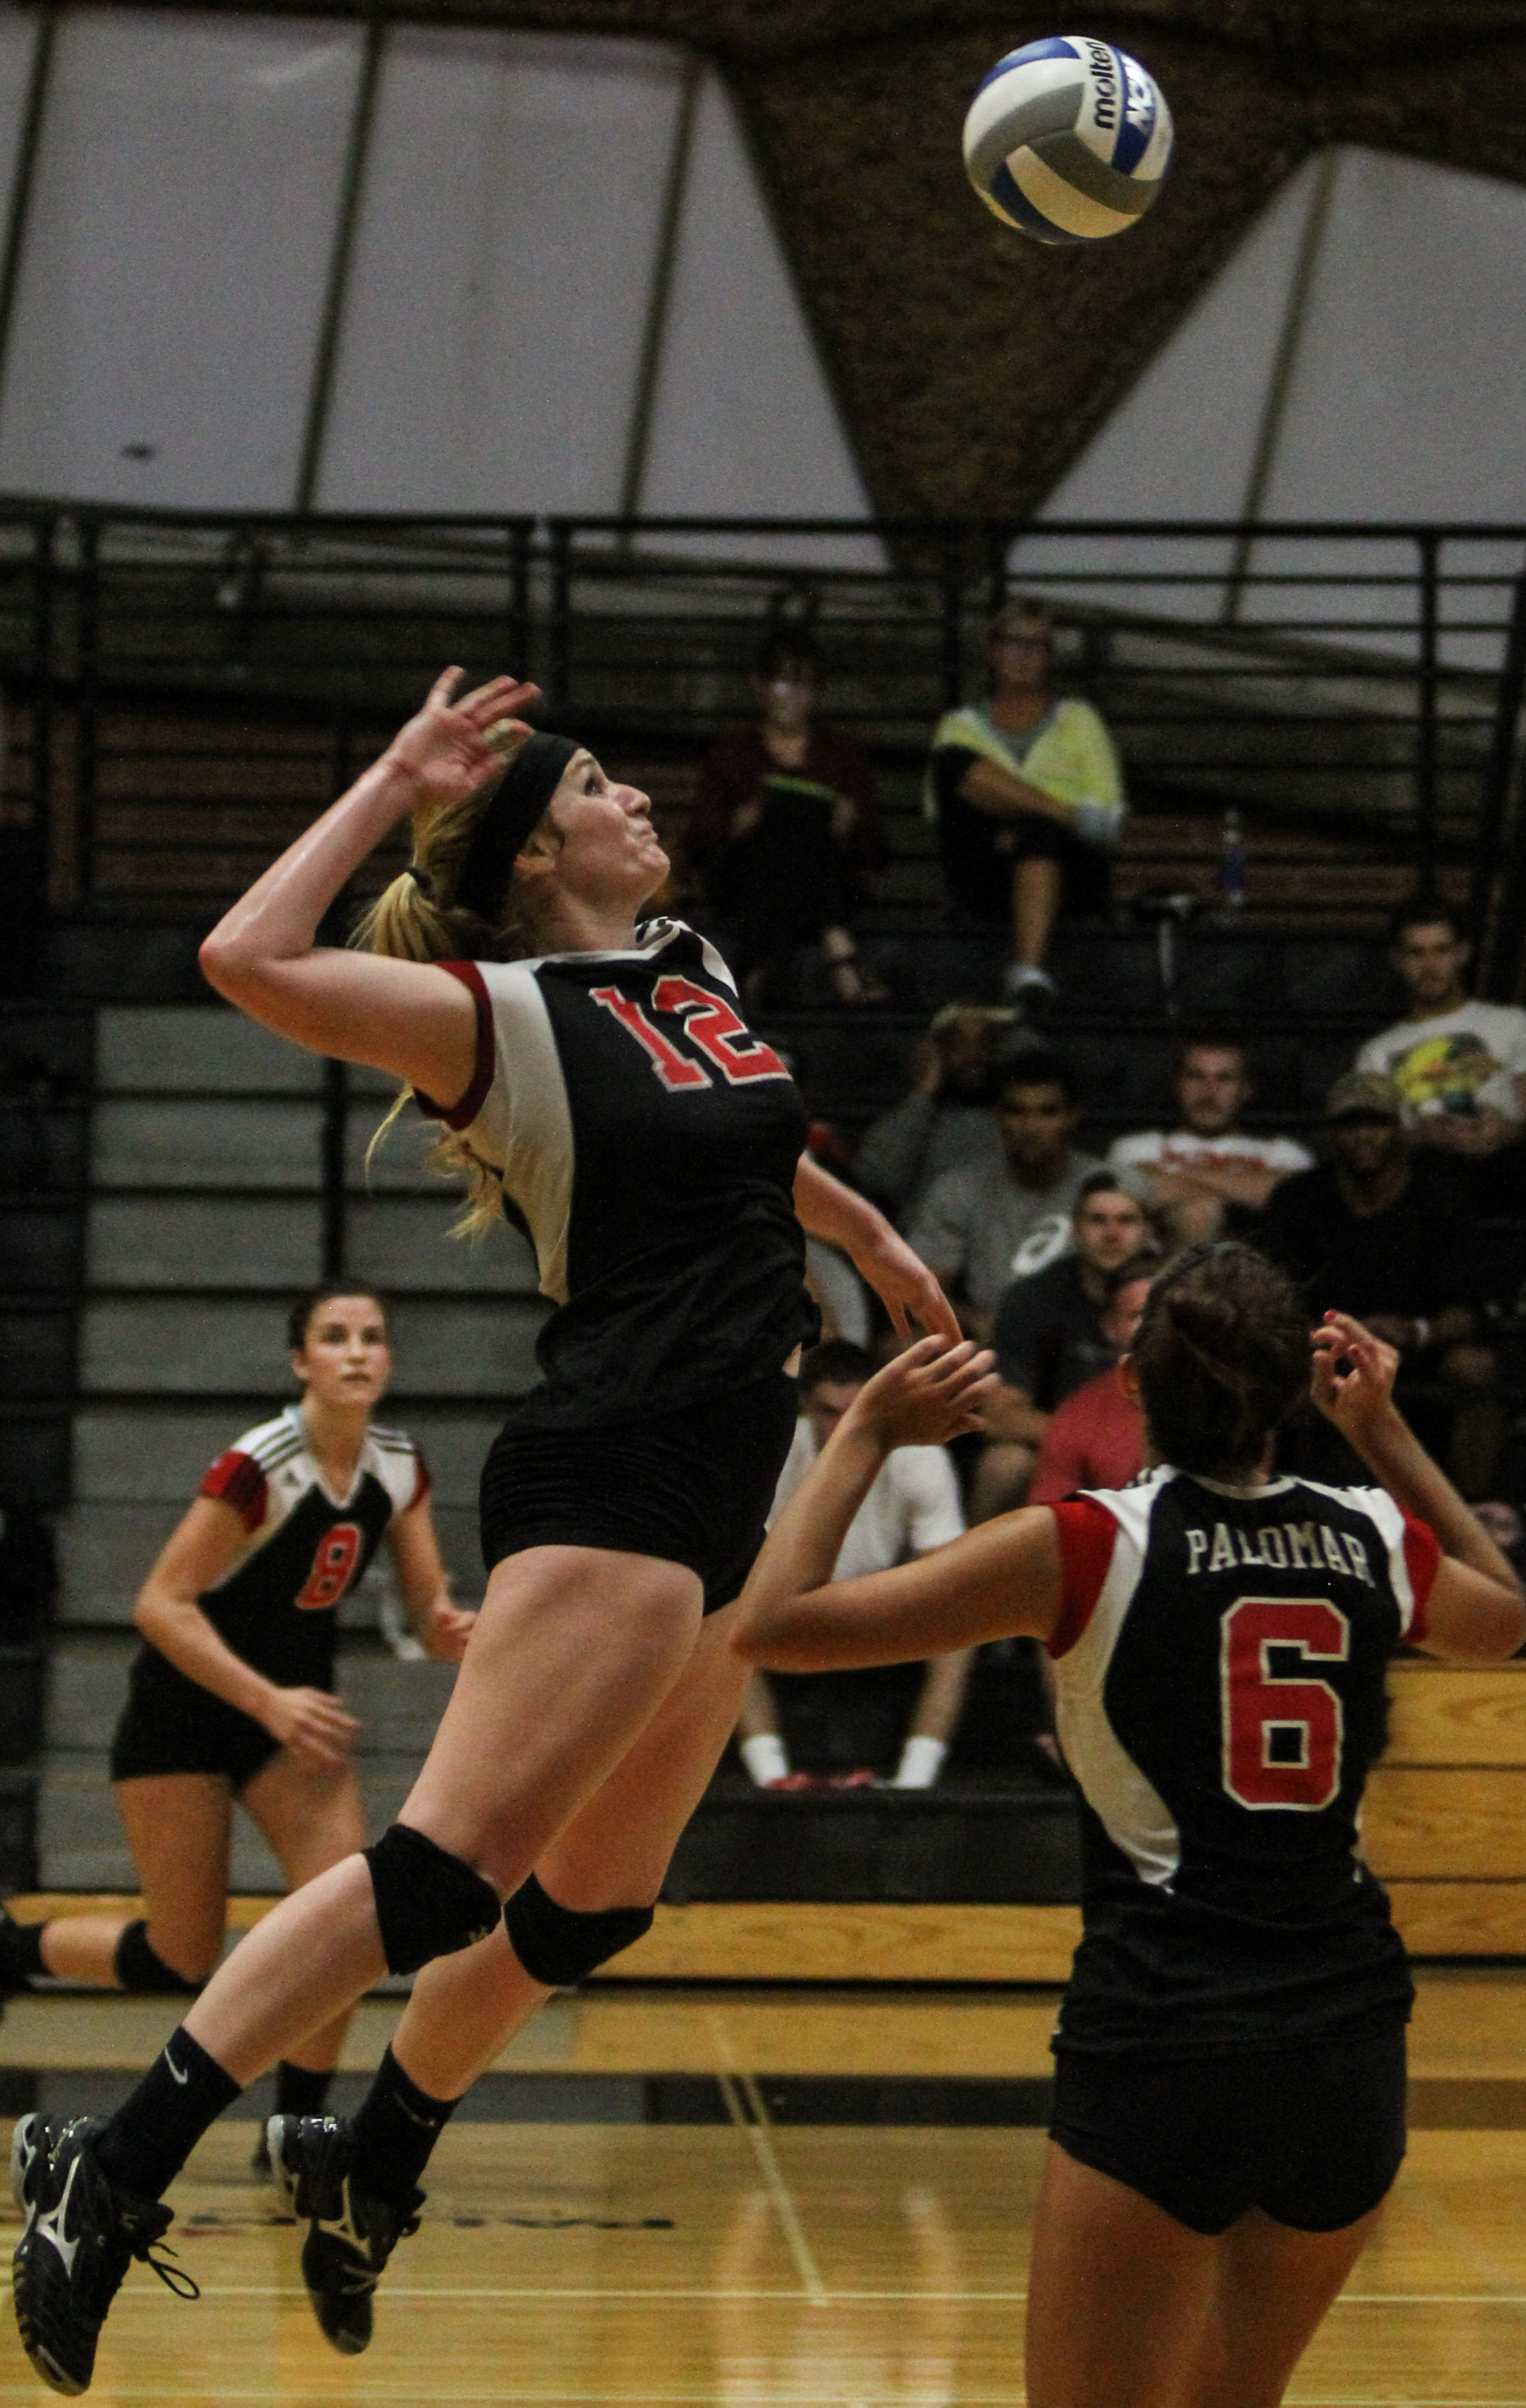 Palomar College Comets women volleyball hosted San Diego City College Knights at the Dome Wednesday night October 22, 2014. The Comets (L/R) #6 Aspen Luedtke sets the ball for #12 Maci Lerno during the second set, the Comets went on to win 3-1. The Comets ranked #19 in the state defeated the #23 ranked Knights by a score of 3-1 at the dome Wednesday night. With the win the Comets took sole possession of second place and improved their record to (12-3) overall (6-2) conference. (Philip Farry/The Telescope)